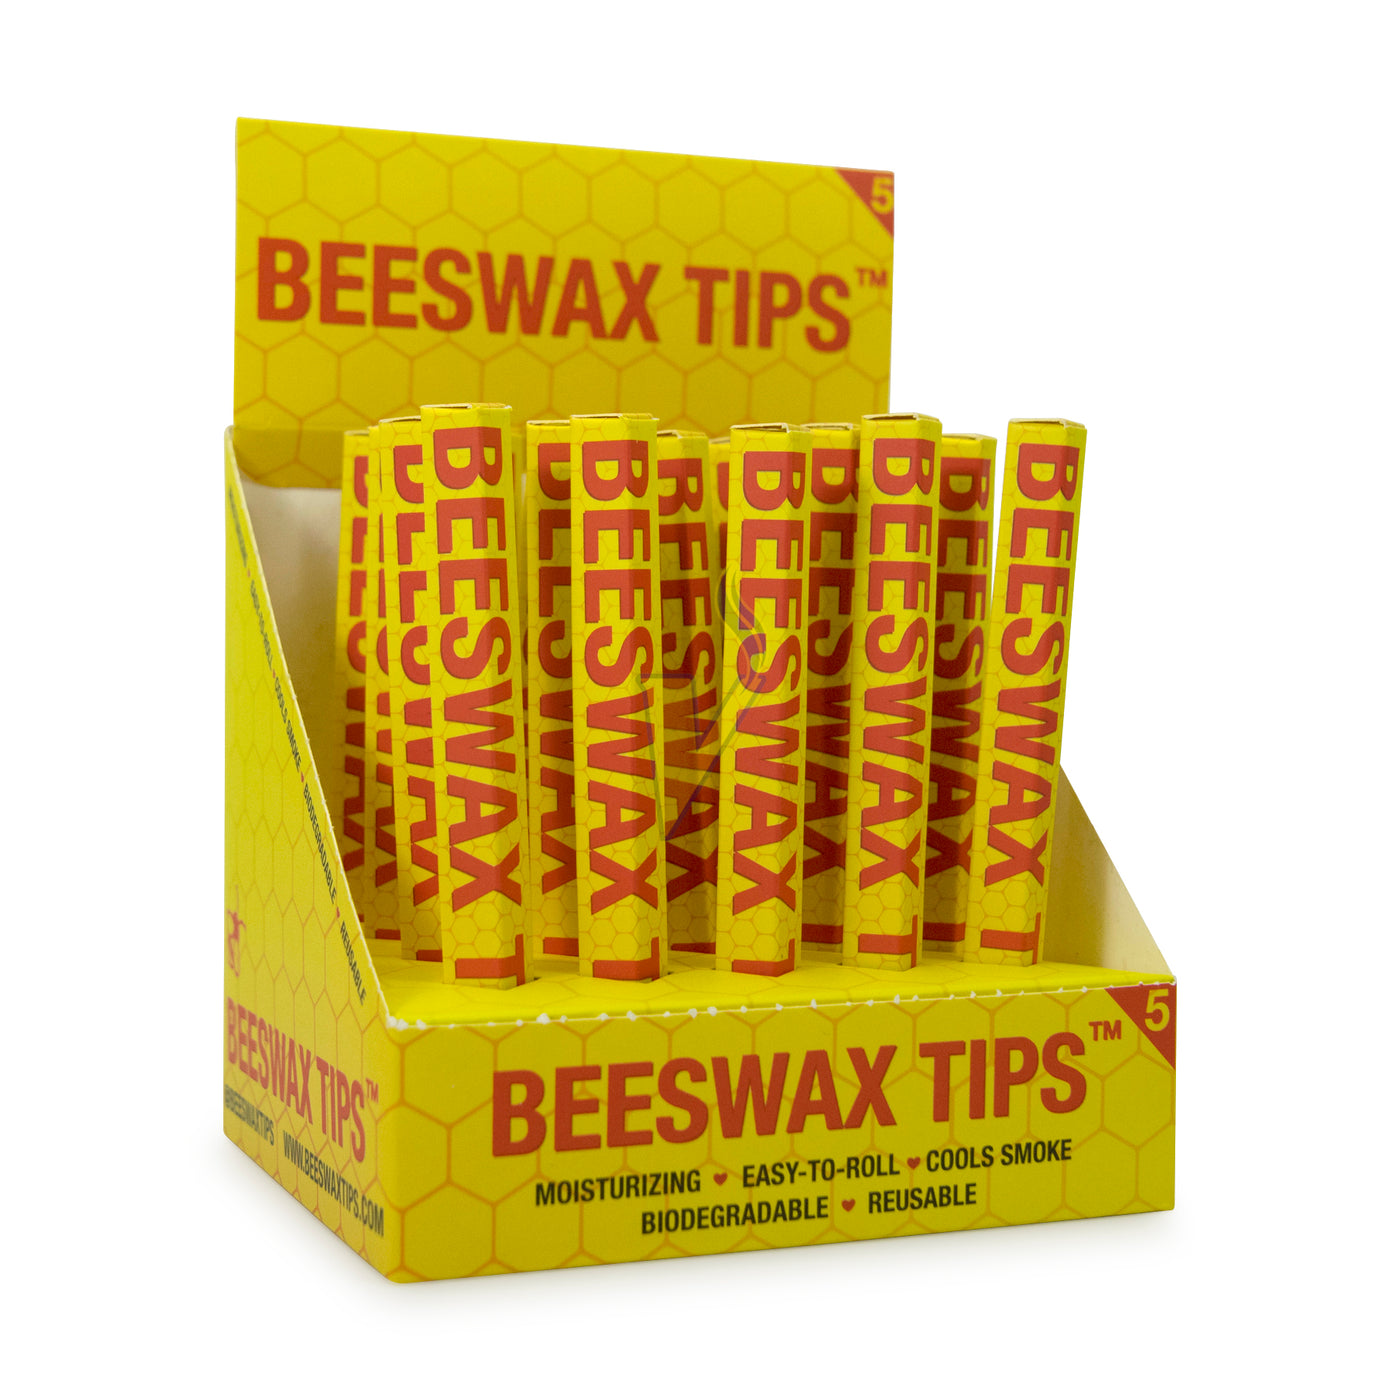 Beeswax Tips Filter Tips